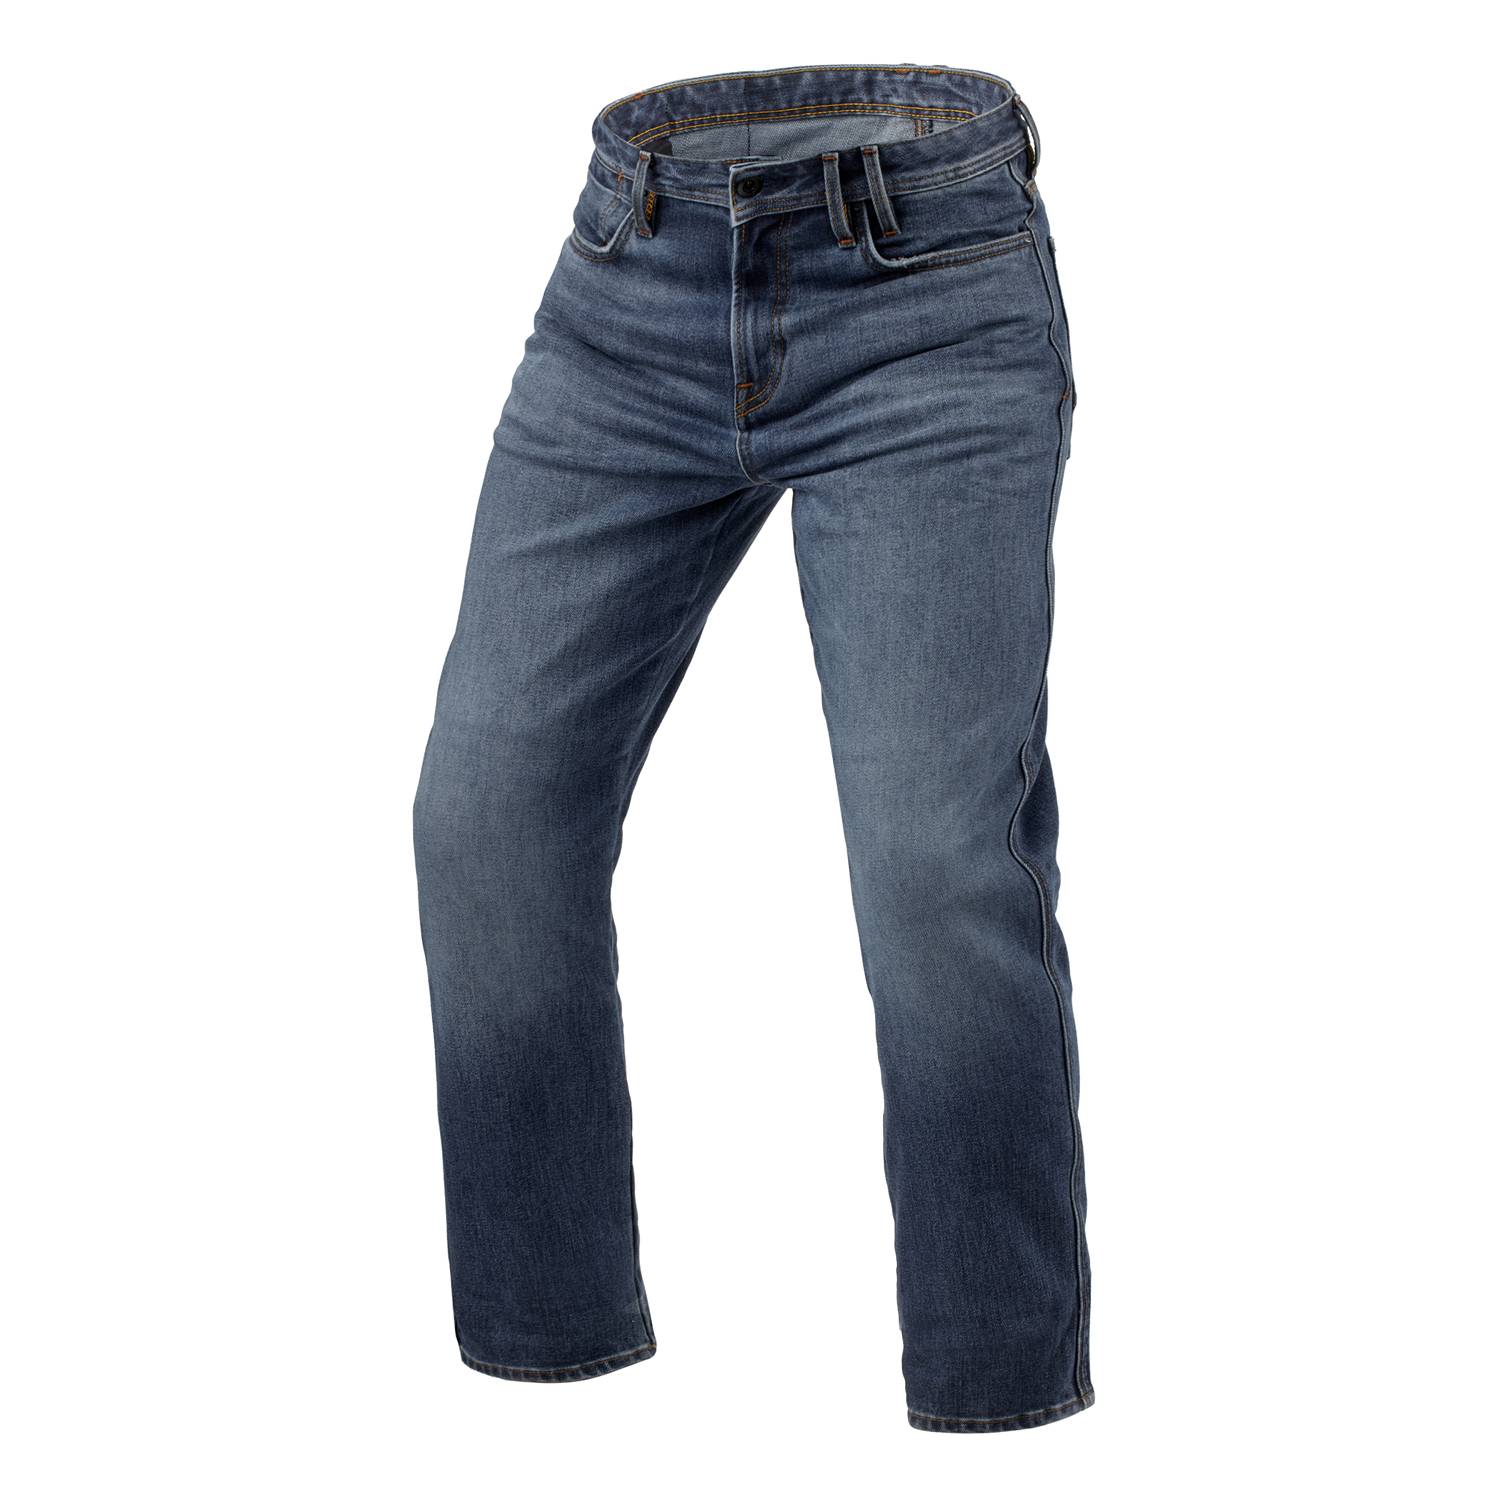 Image of REV'IT! Jeans Lombard 3 RF Medium Blue Stone L34 Motorcycle Jeans Size L34/W30 ID 8700001375948